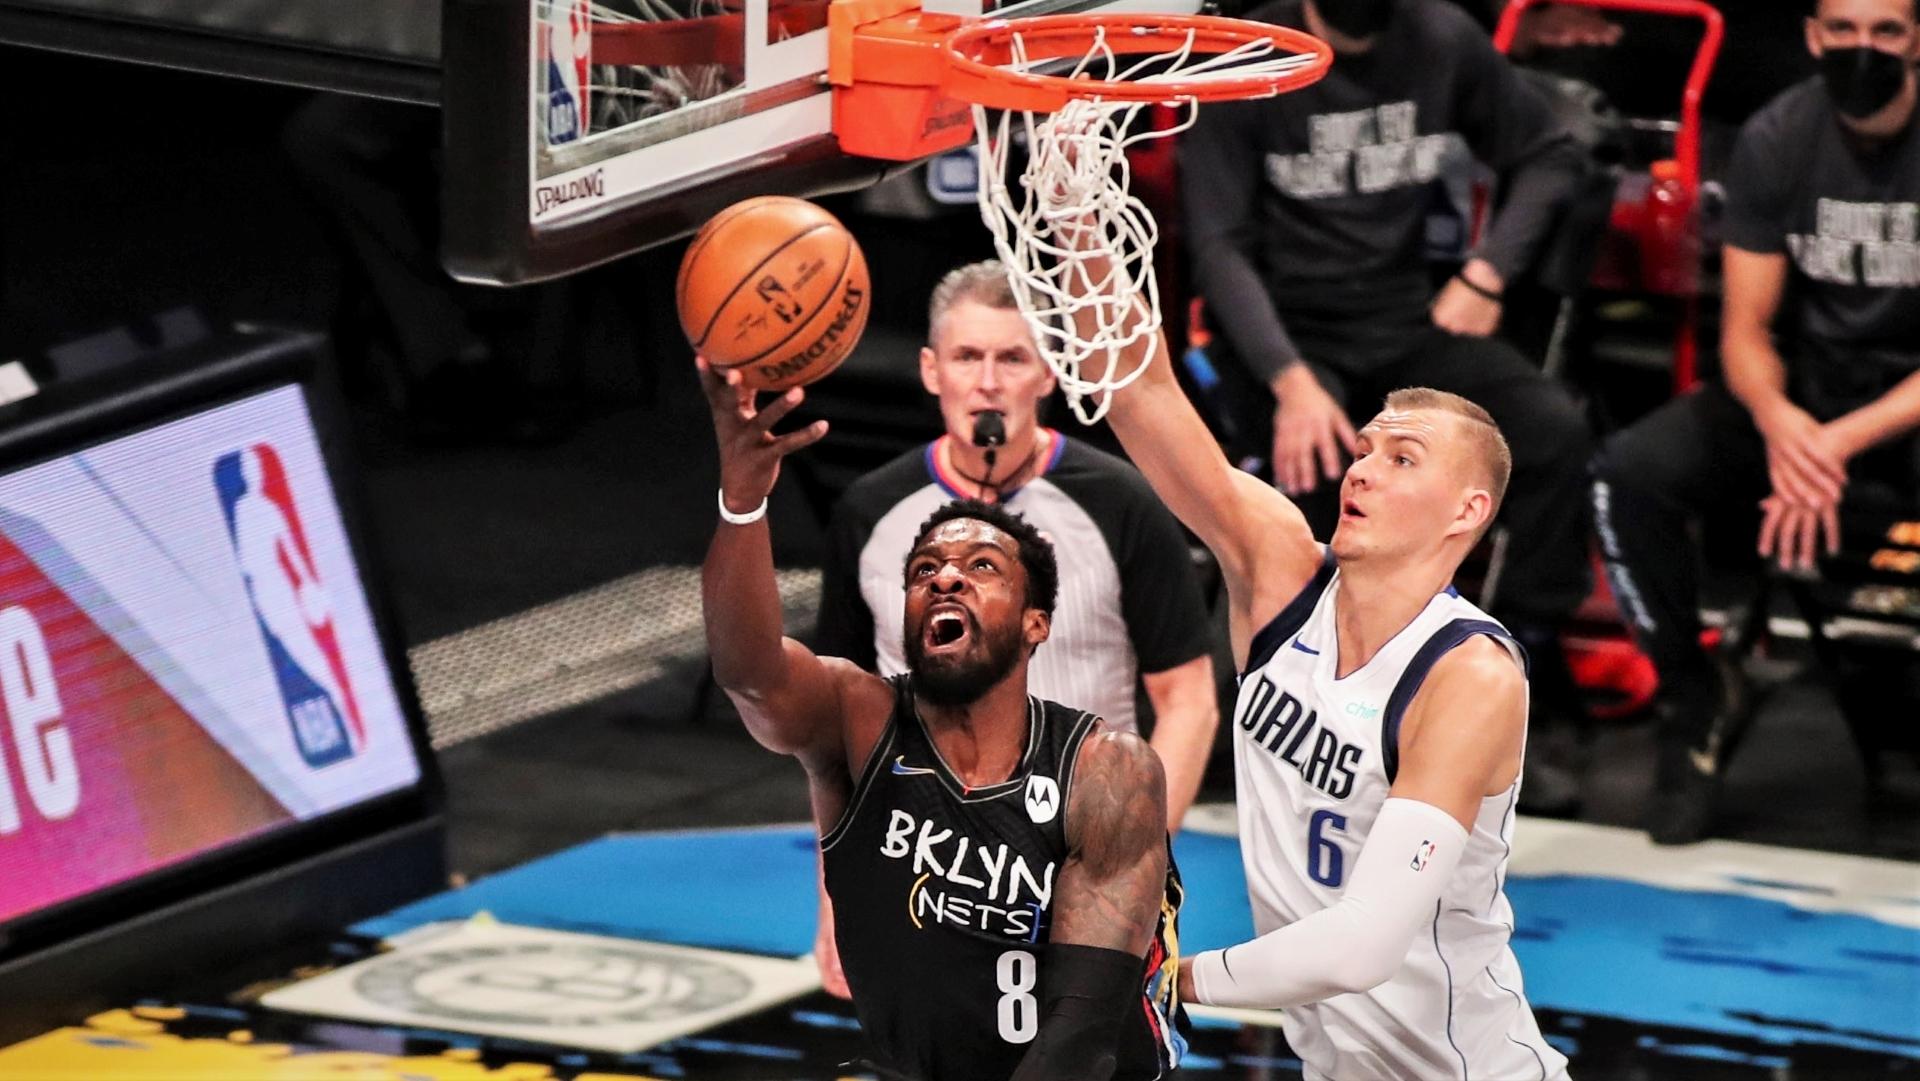 Feb 27, 2021; Brooklyn, New York, USA; Brooklyn Nets forward Jeff Green (8) drives in for a reverse layup in the first quarter against the Dallas Mavericks at Barclays Center. Mandatory Credit: Wendell Cruz-USA TODAY Sports / © Wendell Cruz-USA TODAY Sports